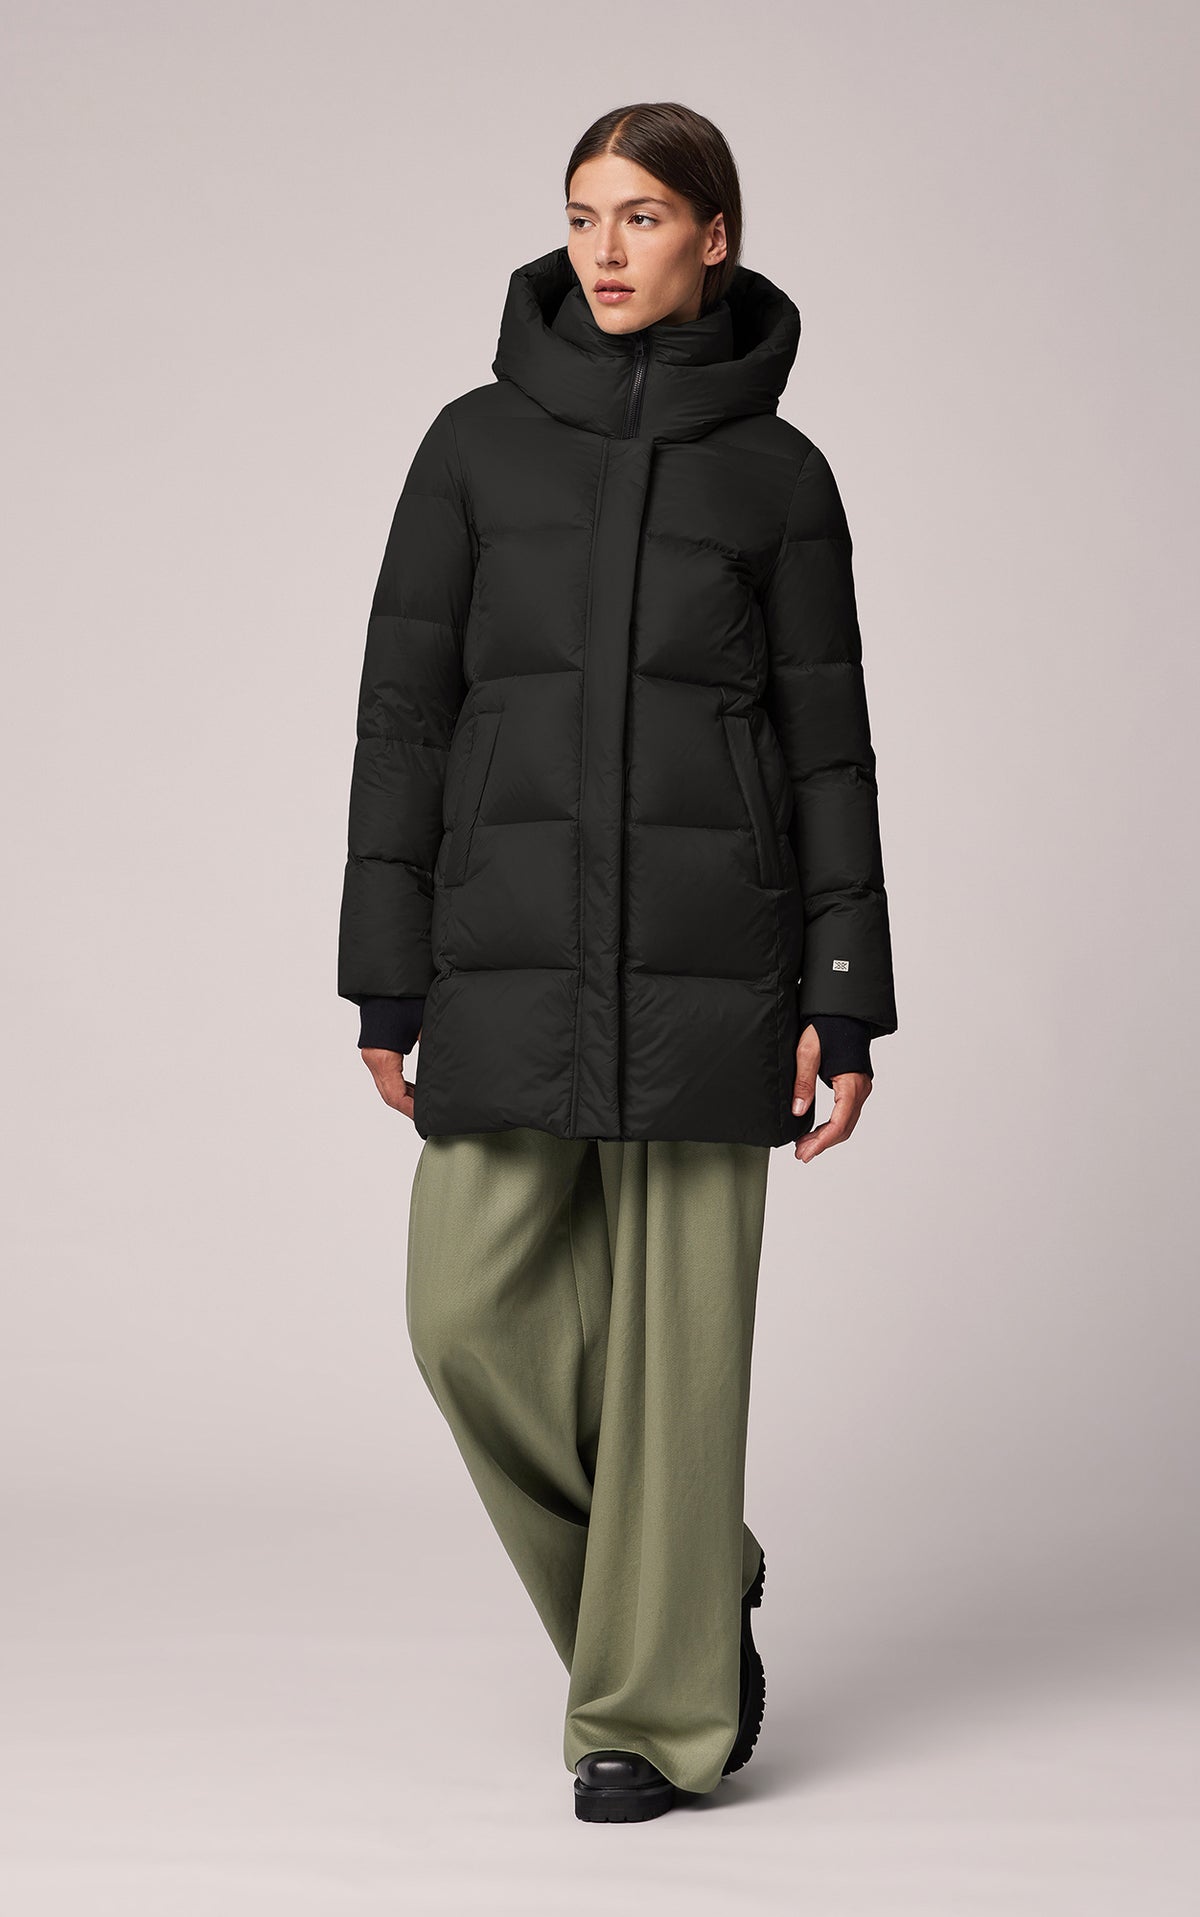 & for Parkas & Soia Kyo | US Women Downs